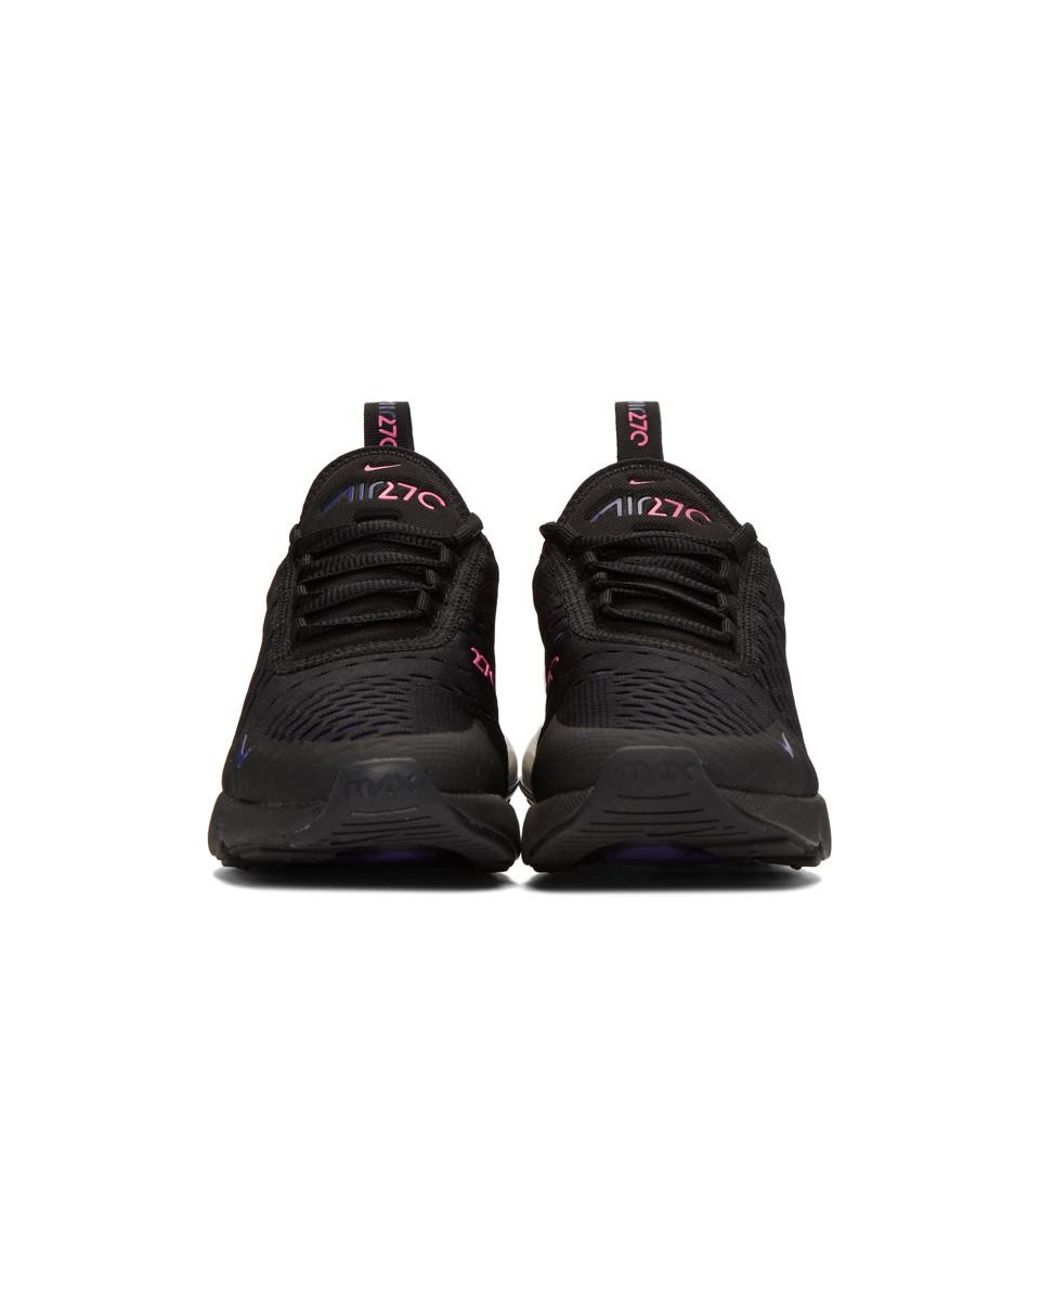 Nike Rubber Black And Purple Air Max 270 Sneakers | Lyst Australia